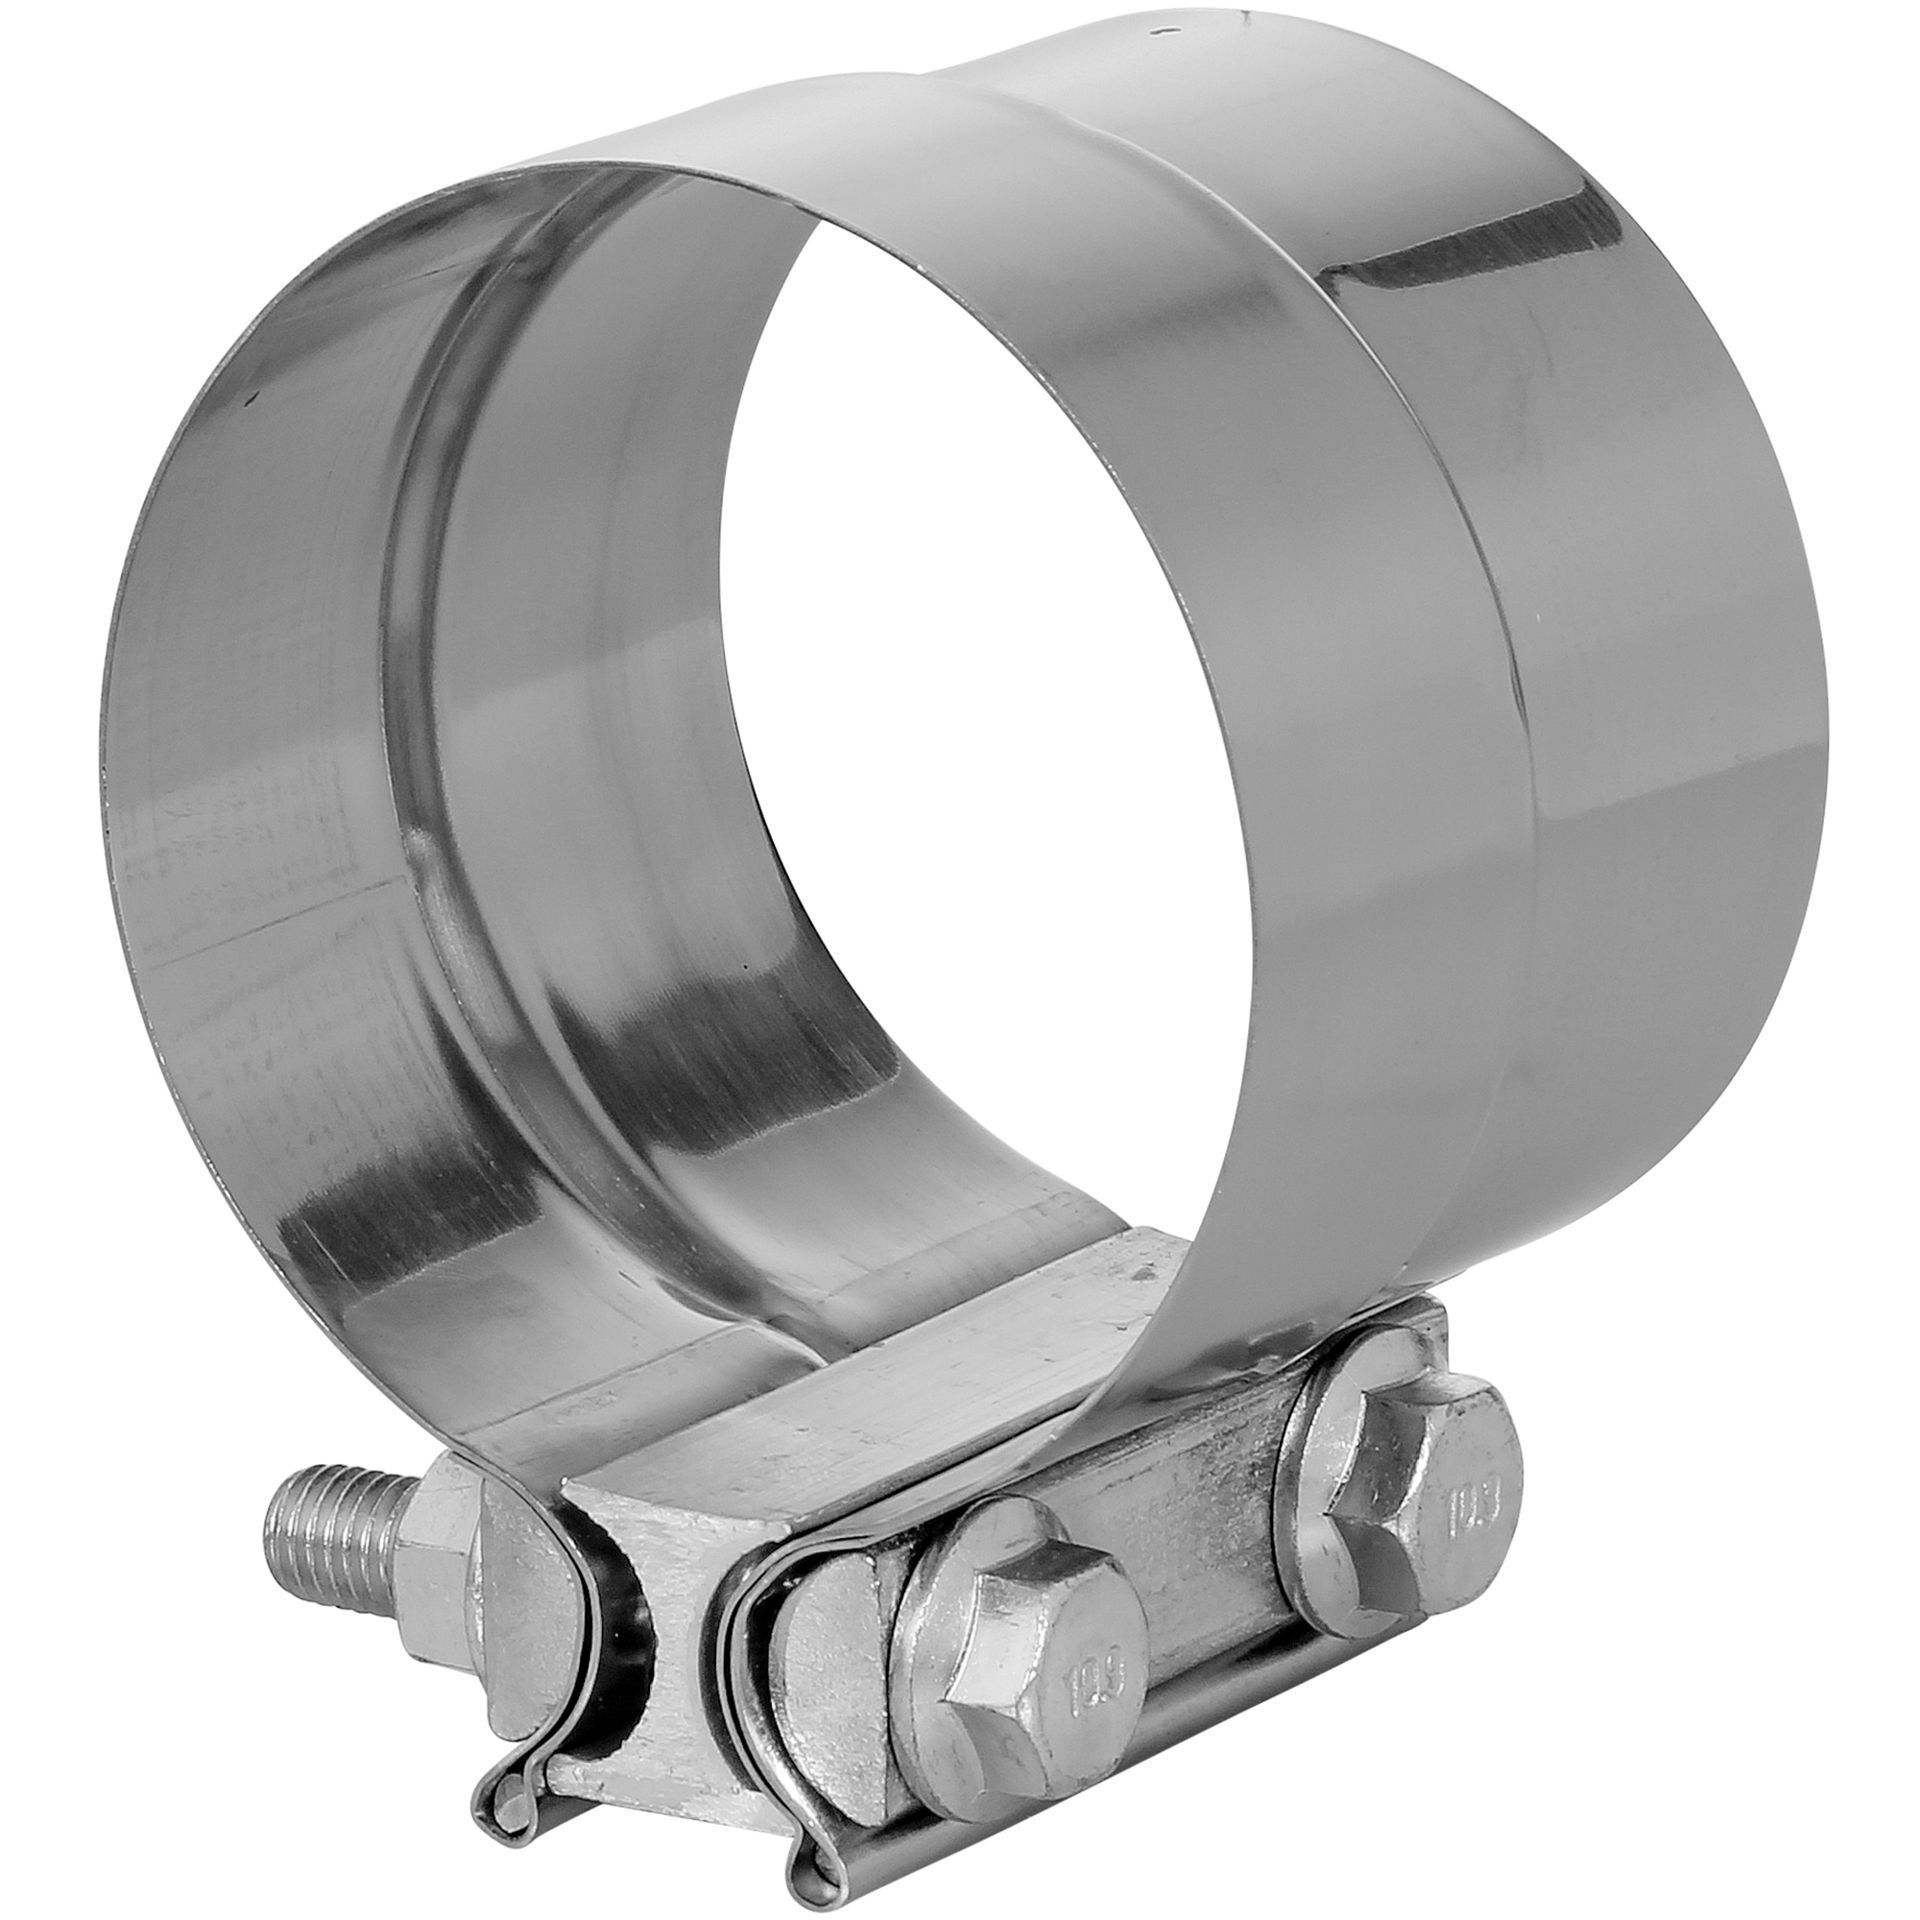 3.5" inch exhaust clamp, muffler clamp, exhaust band clamp 3-1/2" Inch